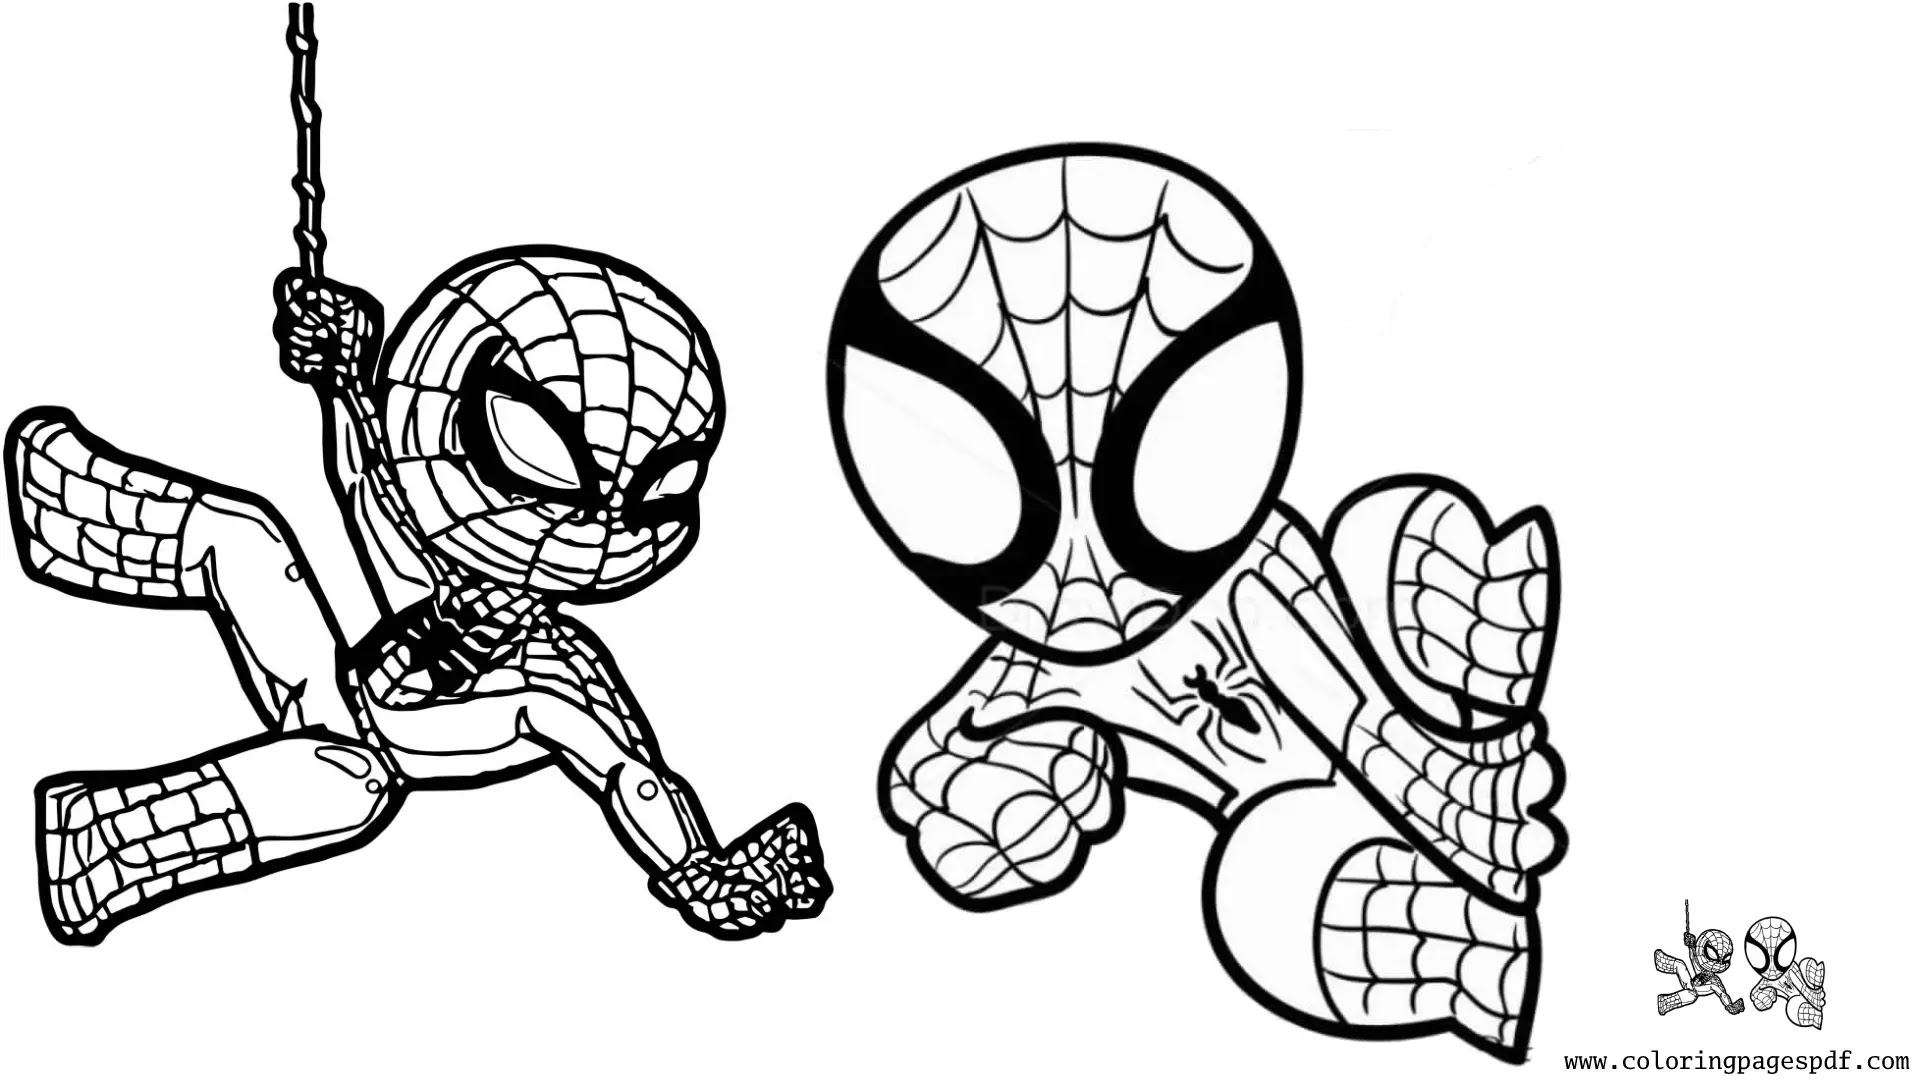 Coloring Page Of Two Mini Spiderman Styles